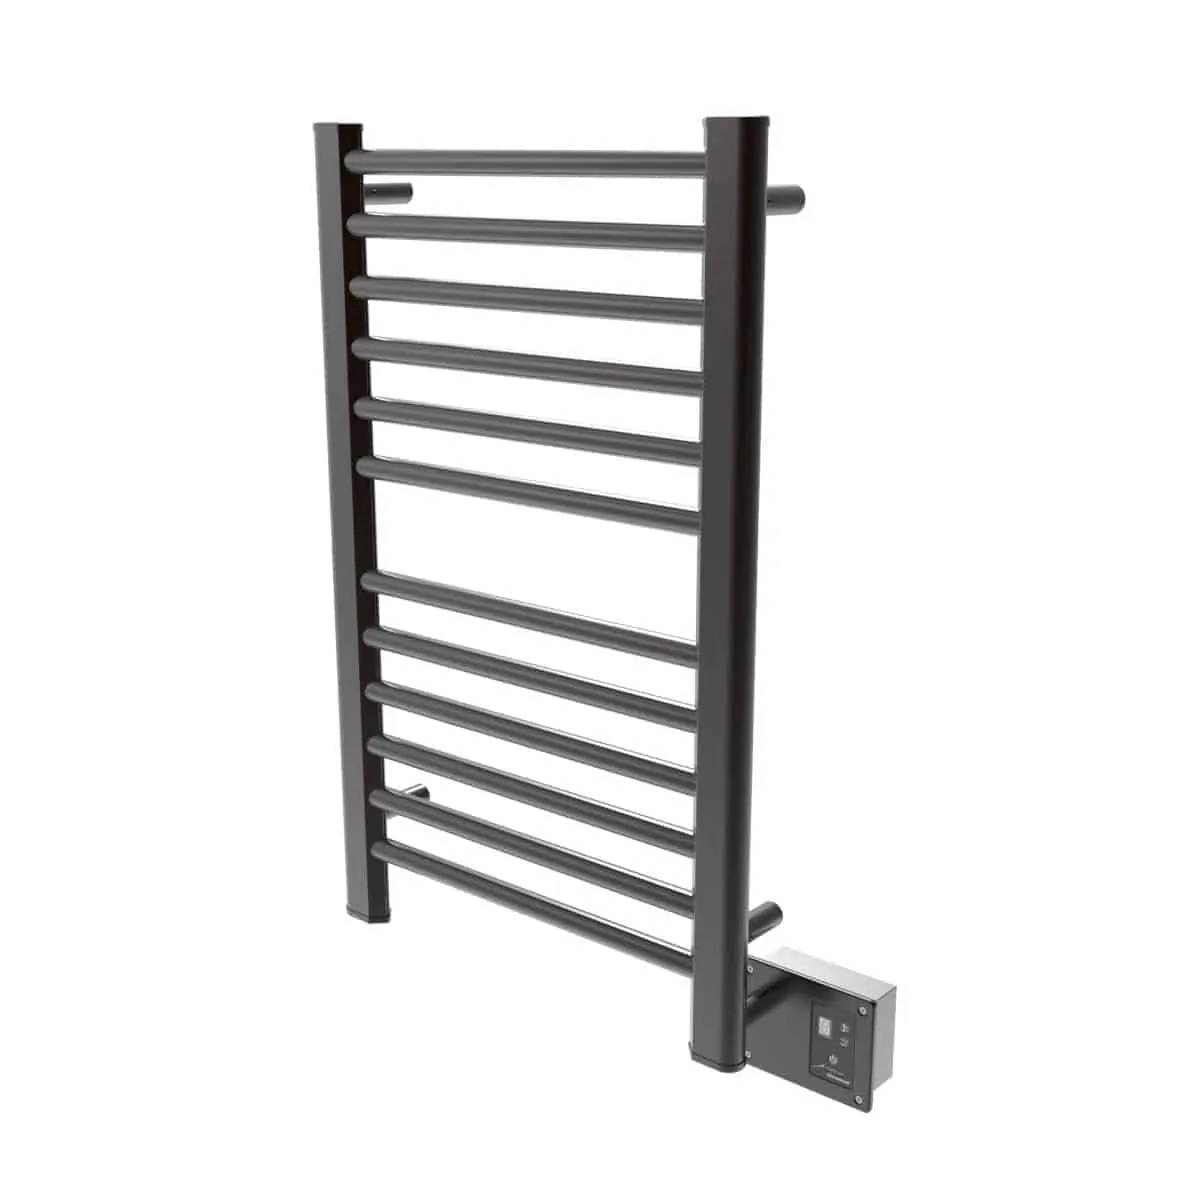 Amba S2133O Model 12 Bar Hardwired Towel Warmer - Oil Rubbed Bronze - Click Image to Close